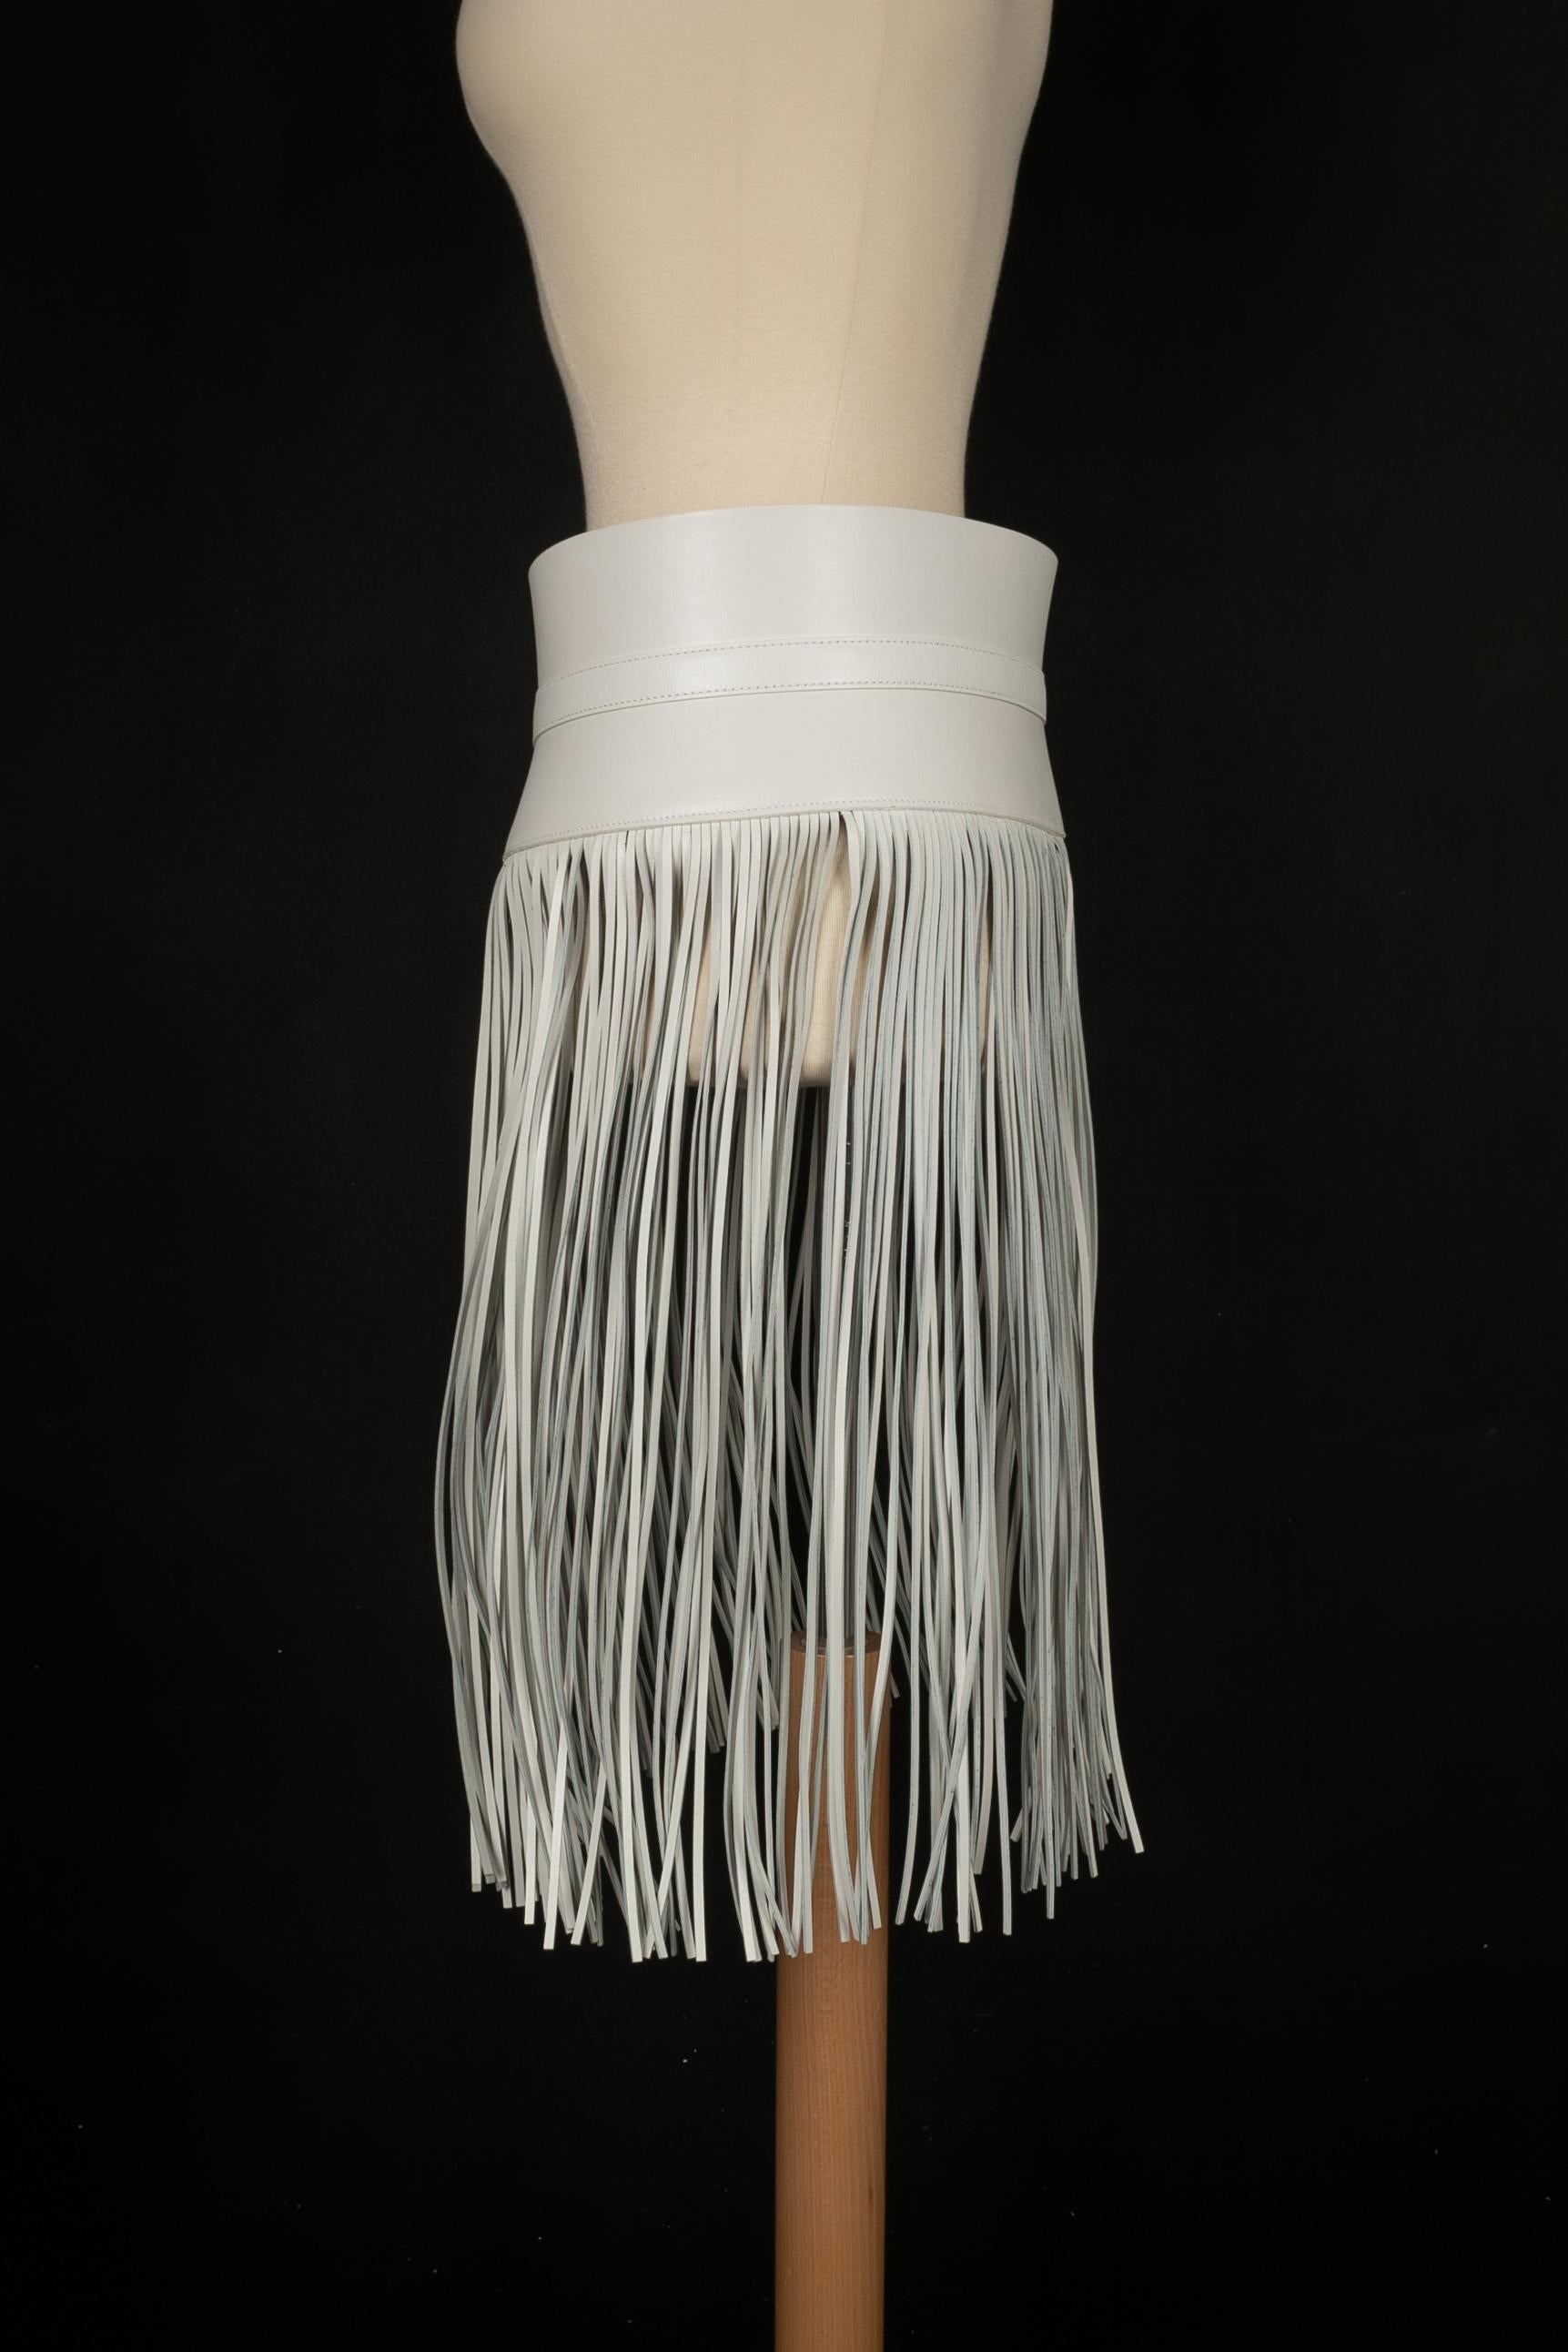 ALAÏA - (Made in Italy) White leather fringed belt. Size 80.

Condition:
Very good condition

Dimensions:
Length: from 77 cm to 80 cm

ACC51